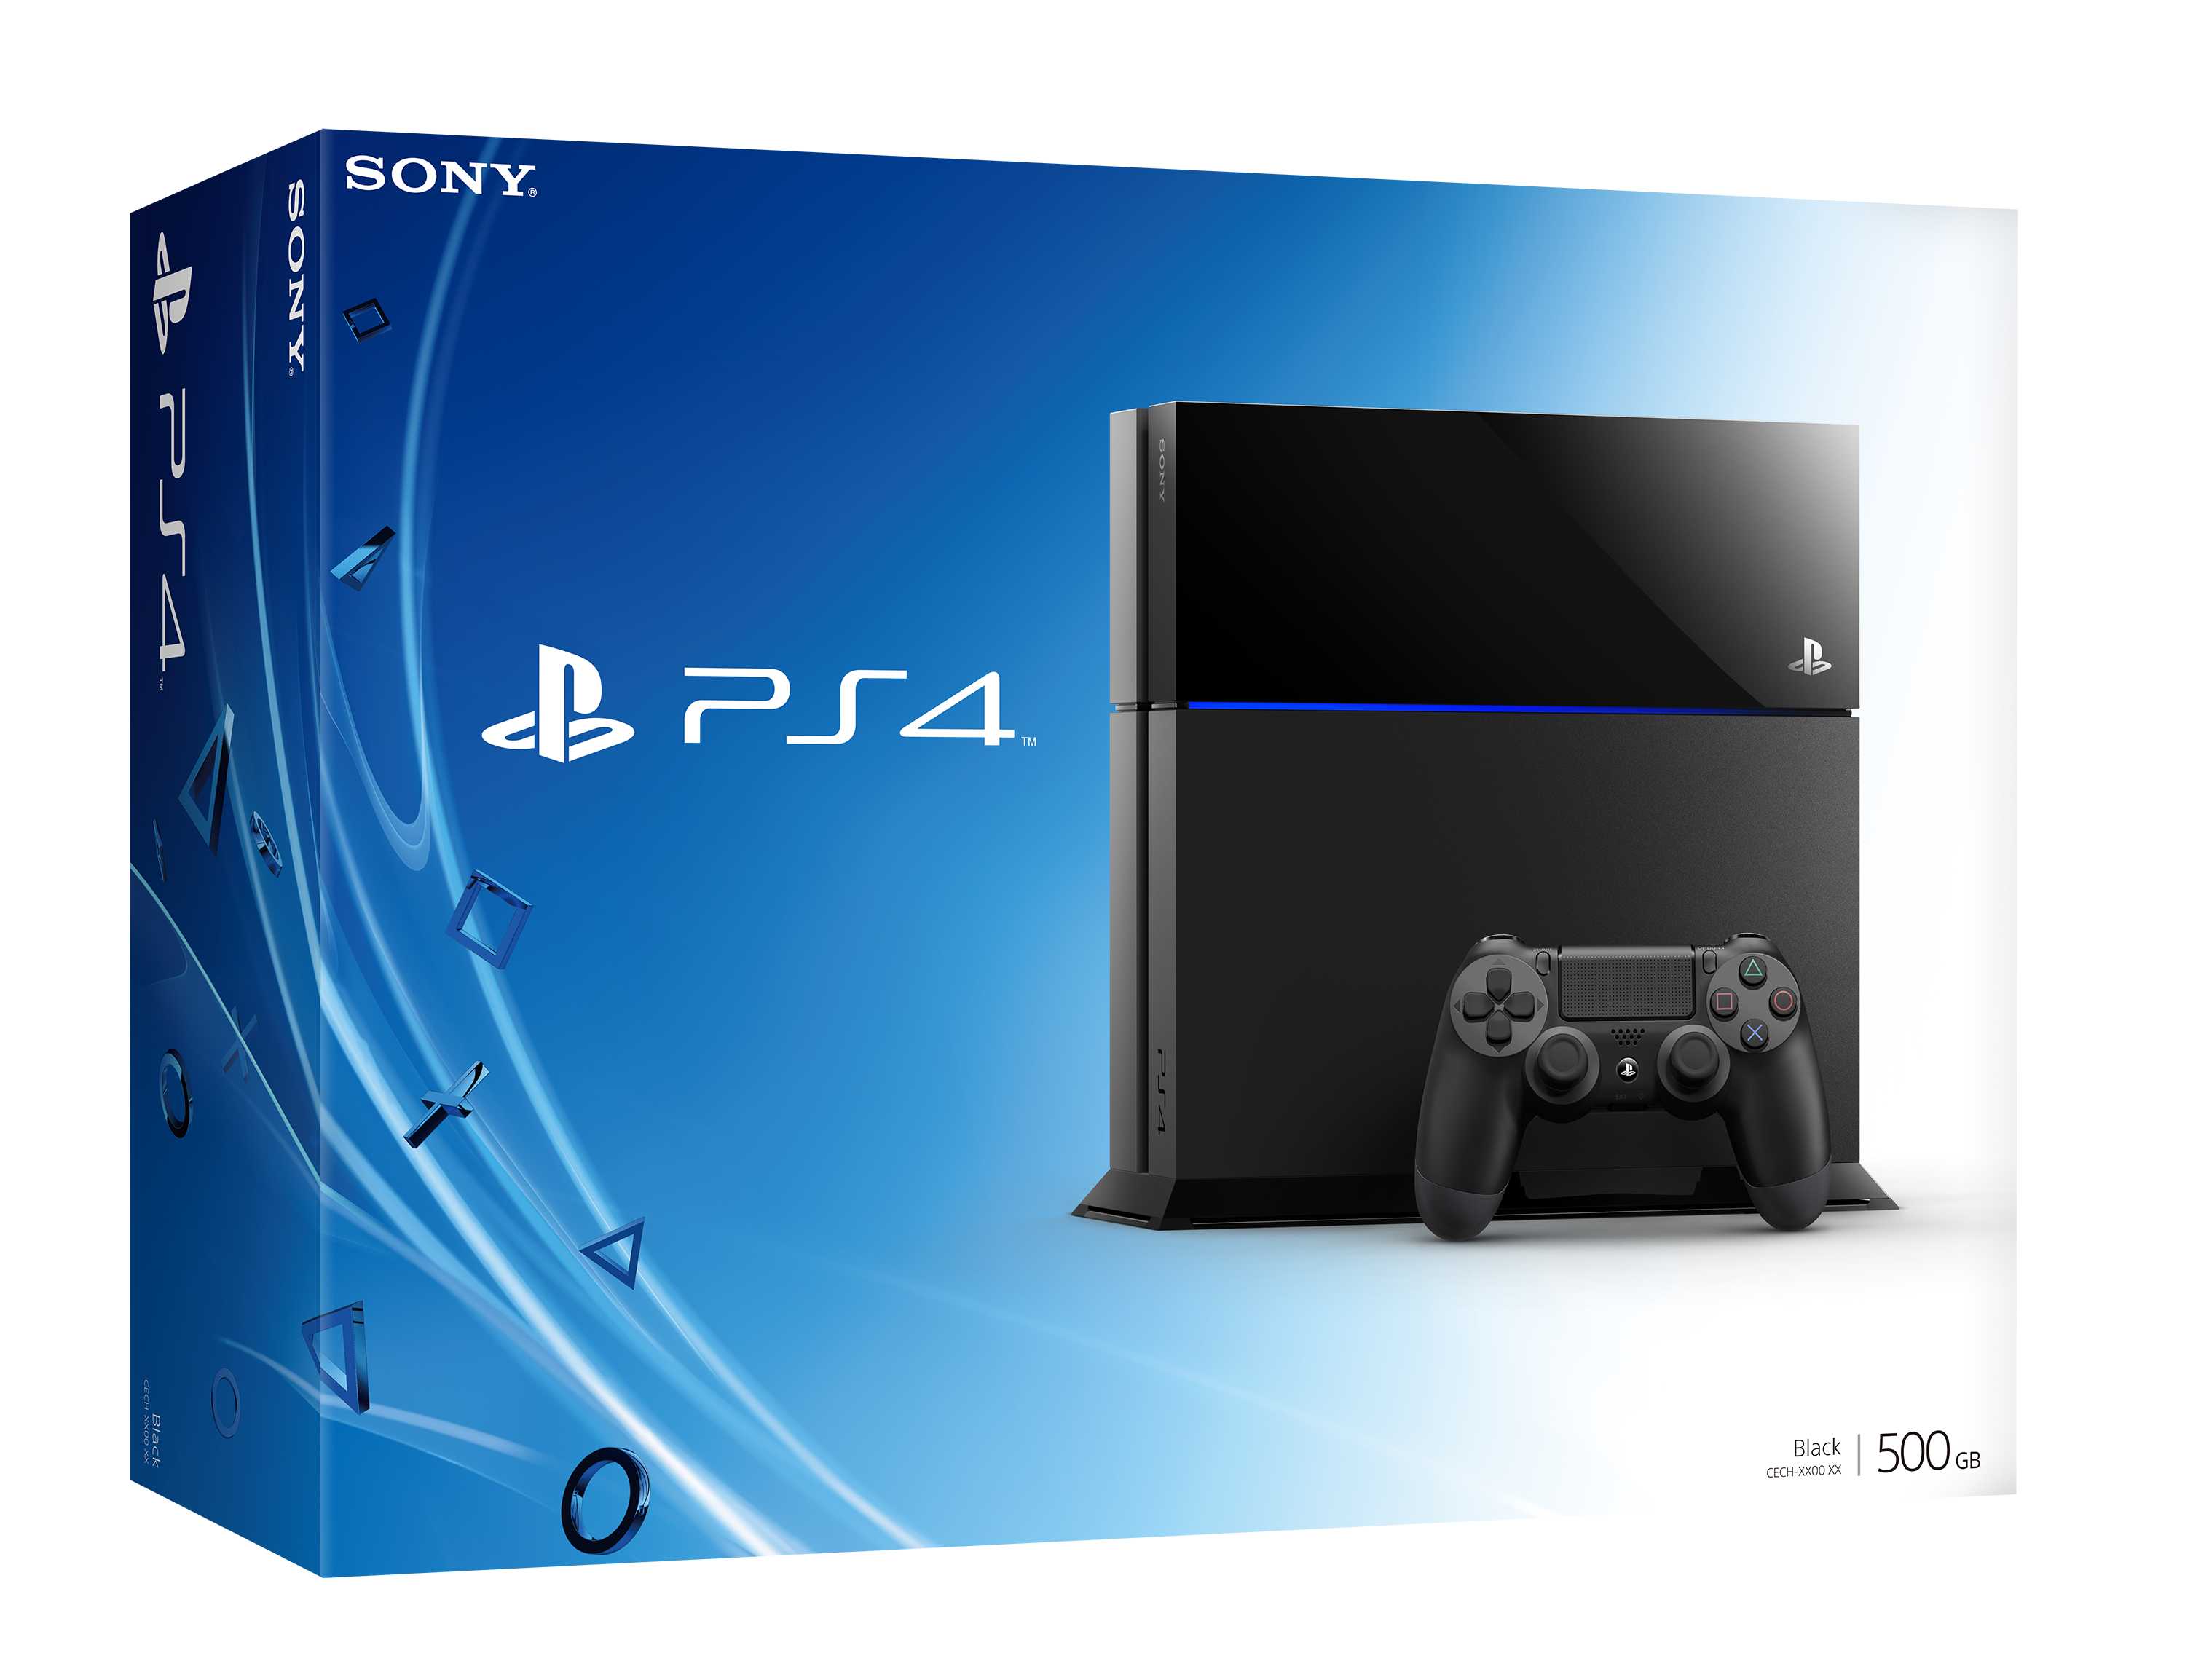 Ps3 Vs Ps4 Packaging How Sony Finally Created The Perfect Box